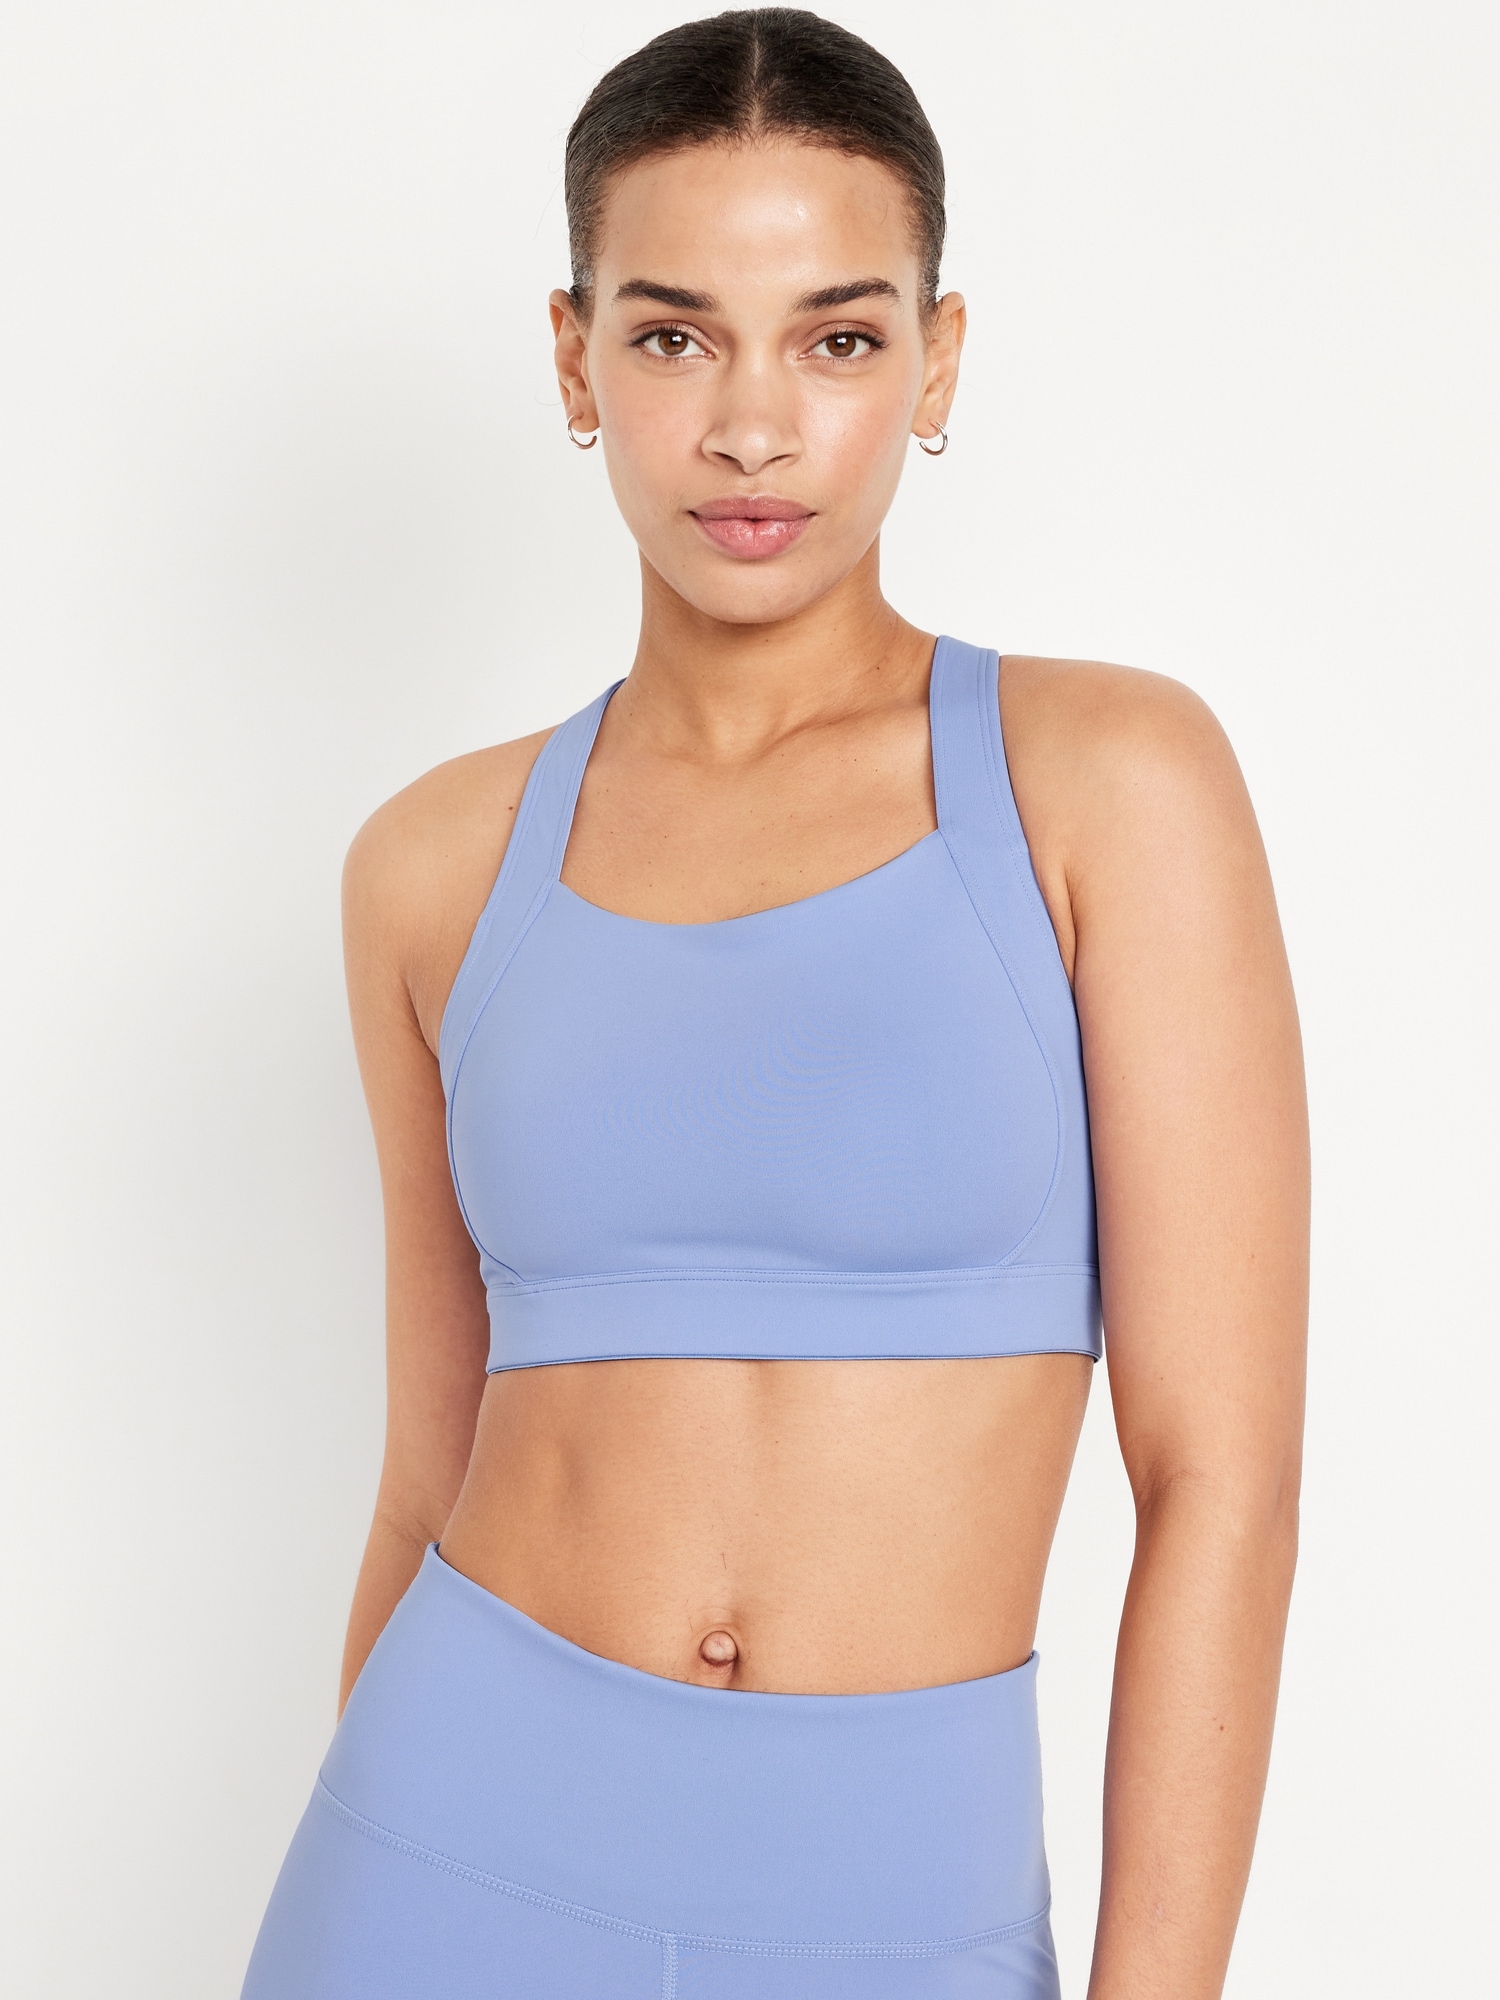 Active by Old Navy Tan Sports Bra Size 38DD - 41% off